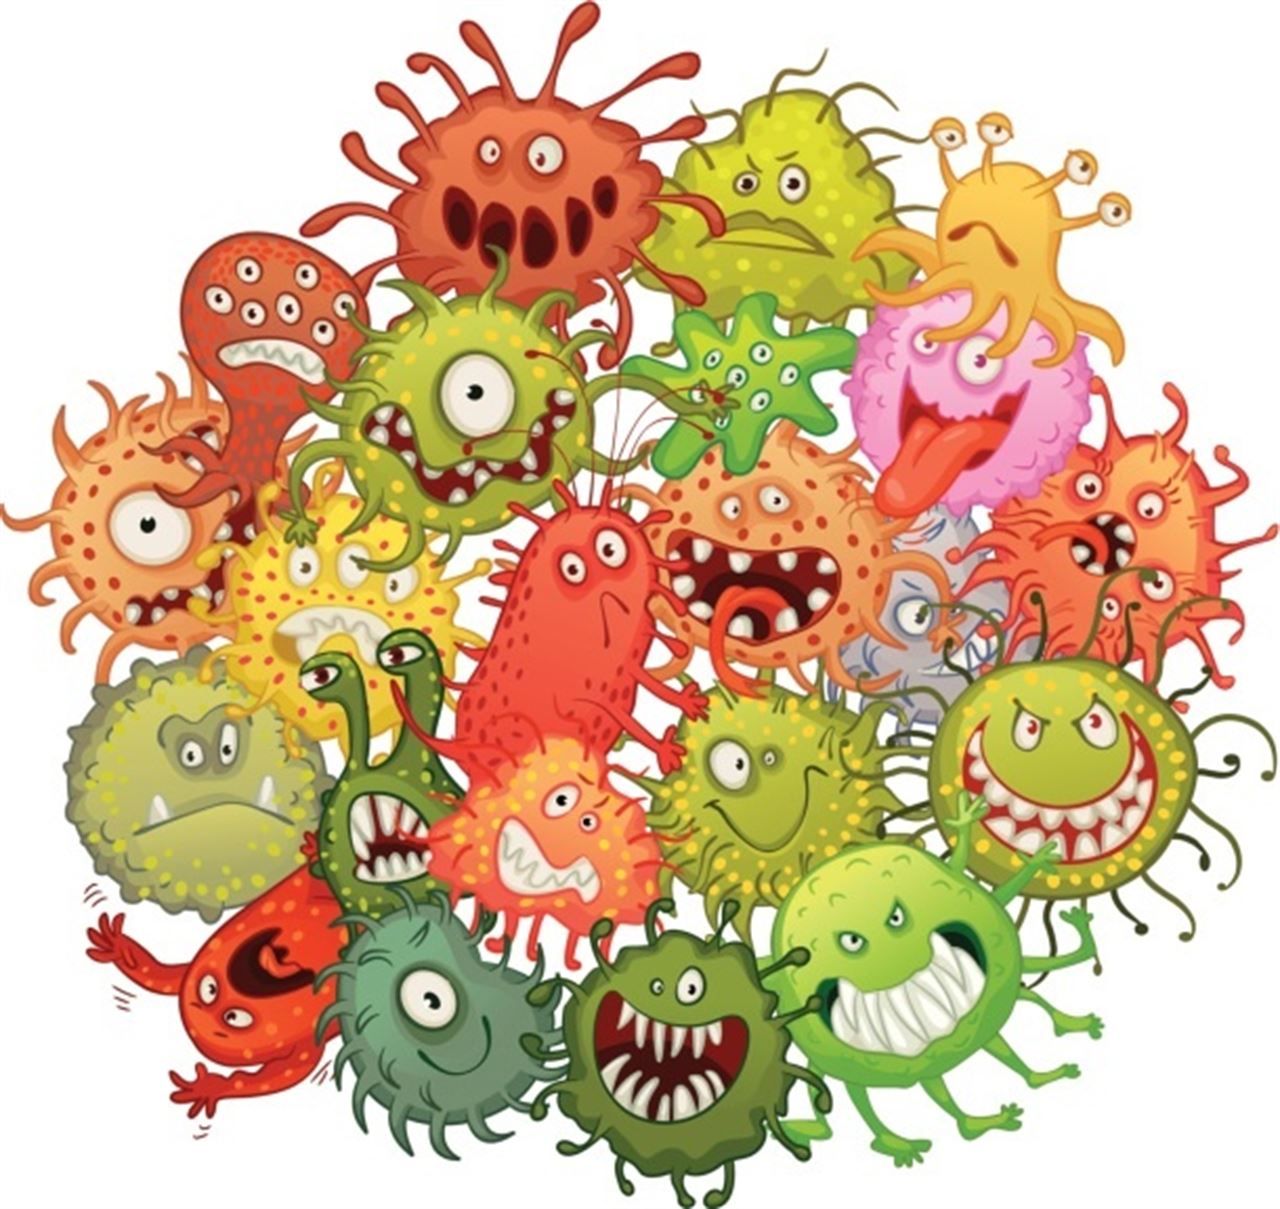 Bacteria clipart sepsis. Cliparts free download clip